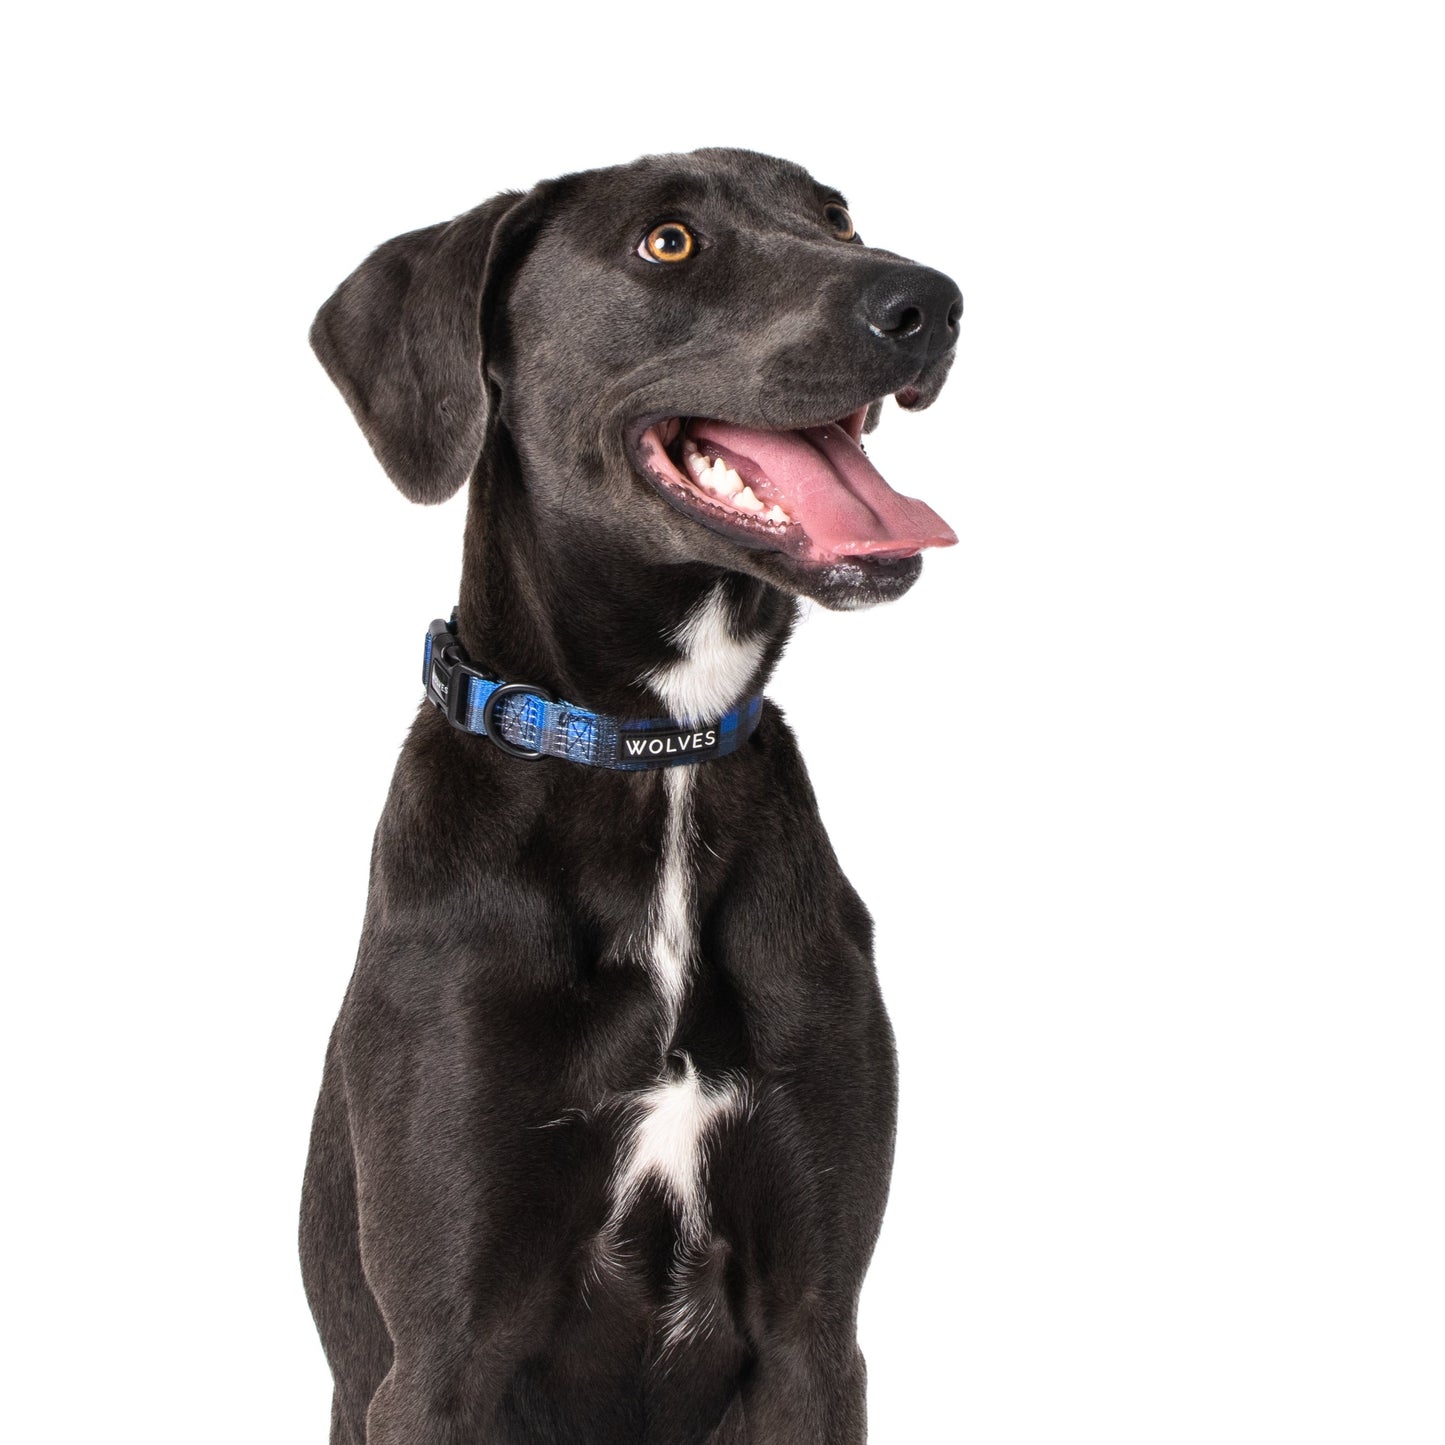 Black dog wearing a Blue & black checked dog collar with "Wolves" logo.